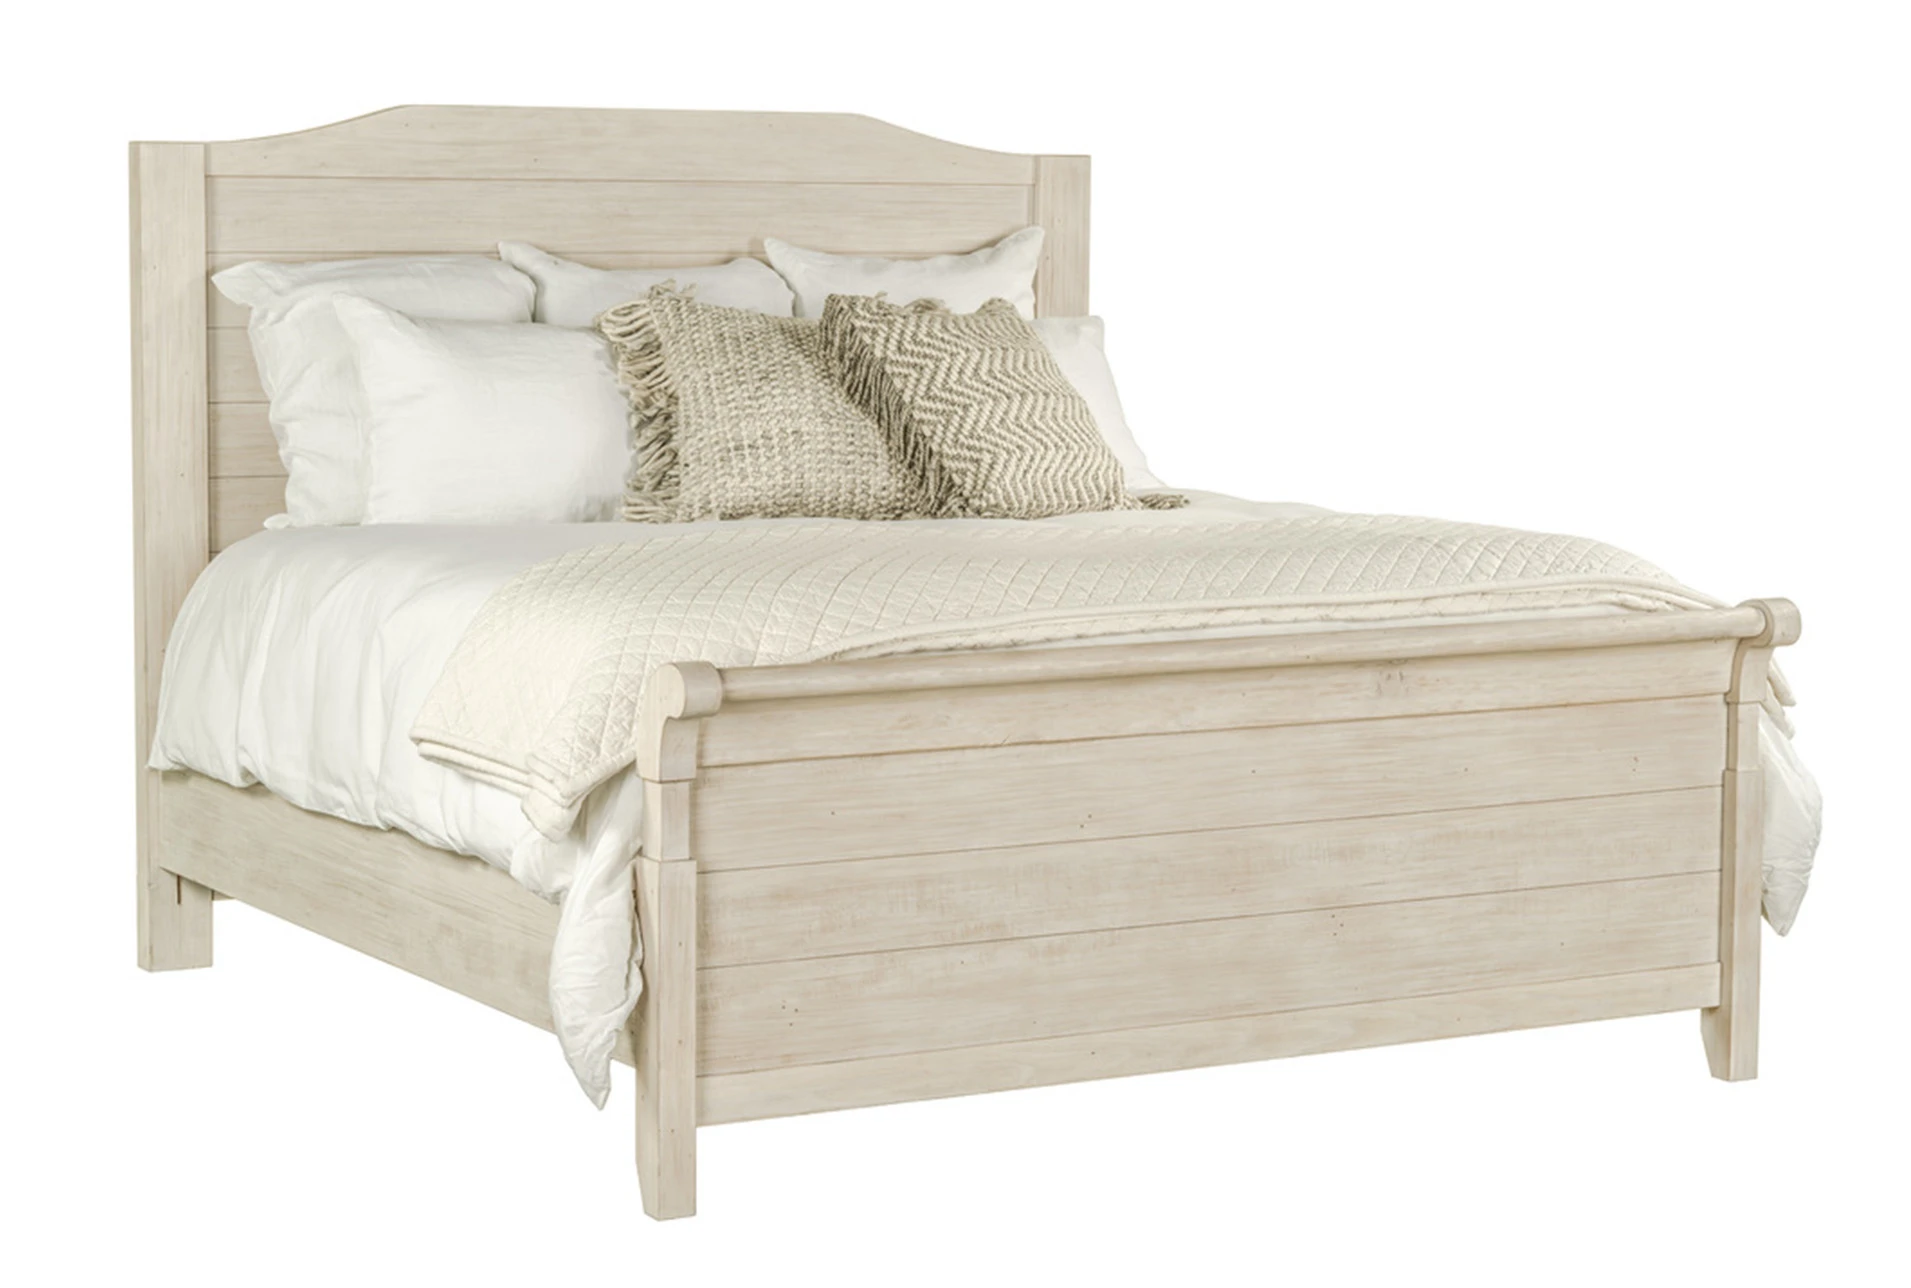 Dutch Barn Feather Queen Sleigh Bed, Lafayette King Sleigh Bed By Home Styles